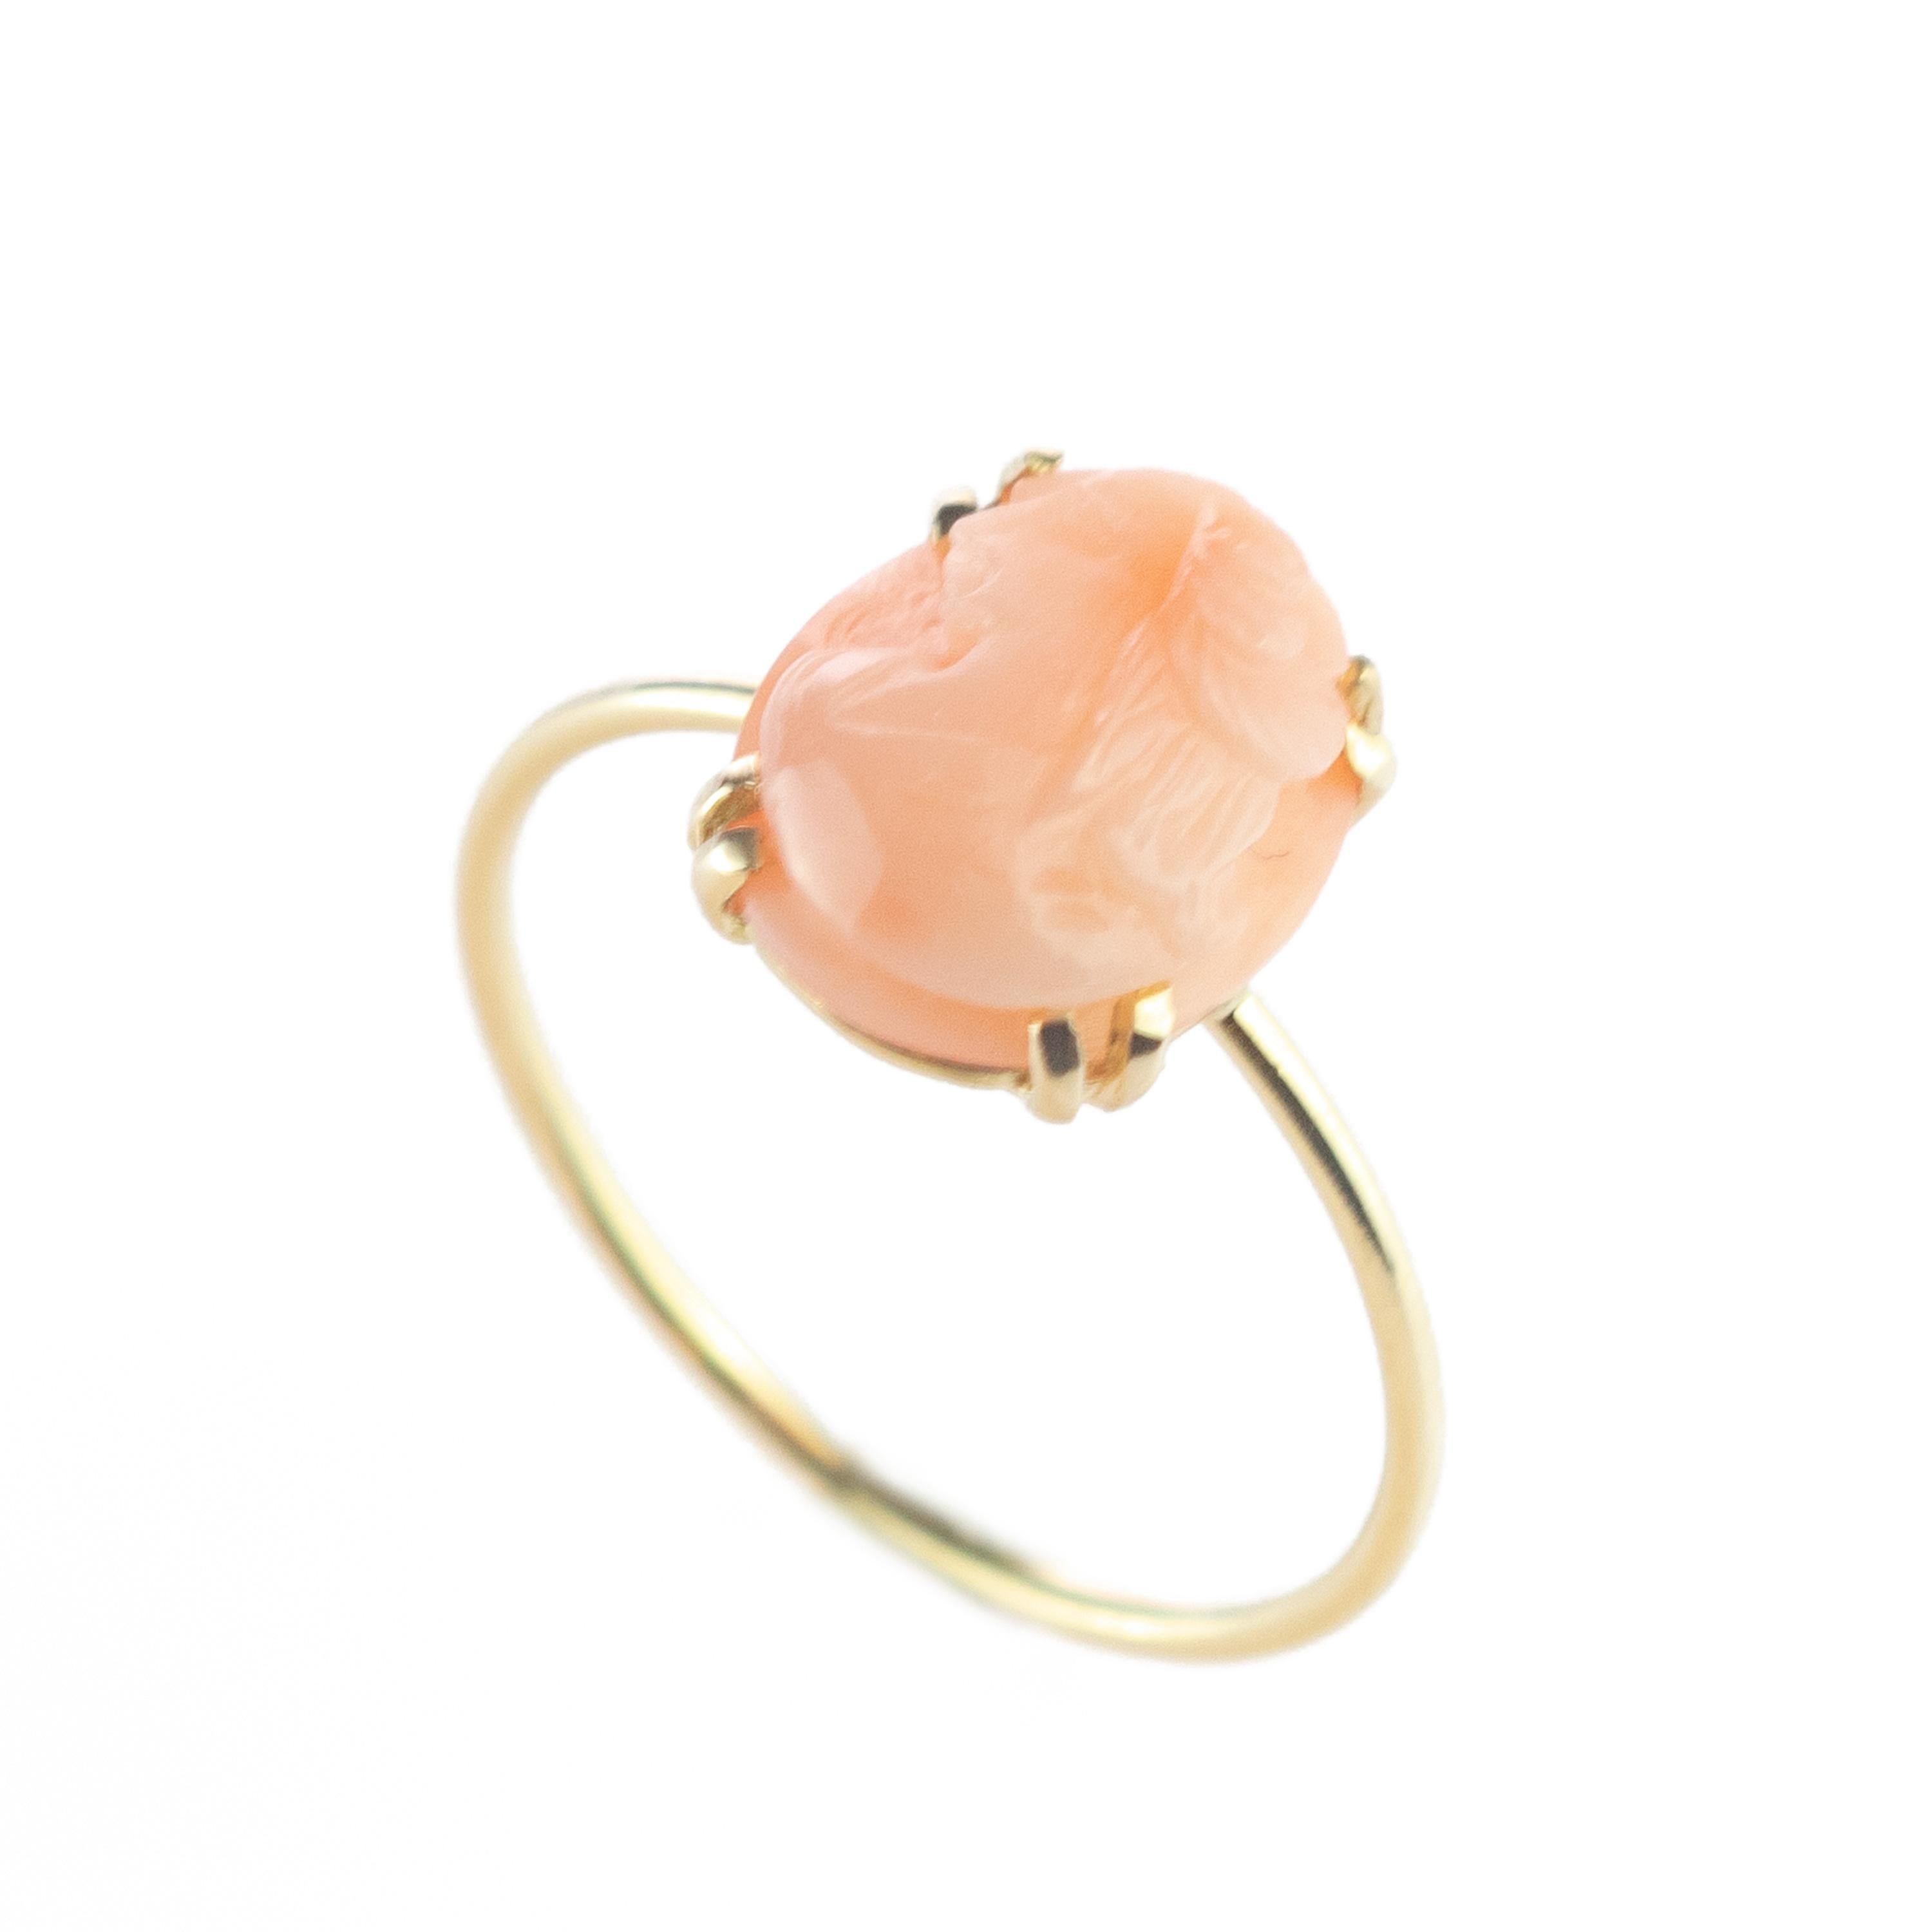 A unique handmade cammeo coral for a high fashion jewellery. Oval signature INTINI Jewels coral jewellery. Modern and Elegant midi ring design in 18 karat yellow gold with a cabochon cut coral with tiny griffes sormounting the ring. Made in Italy